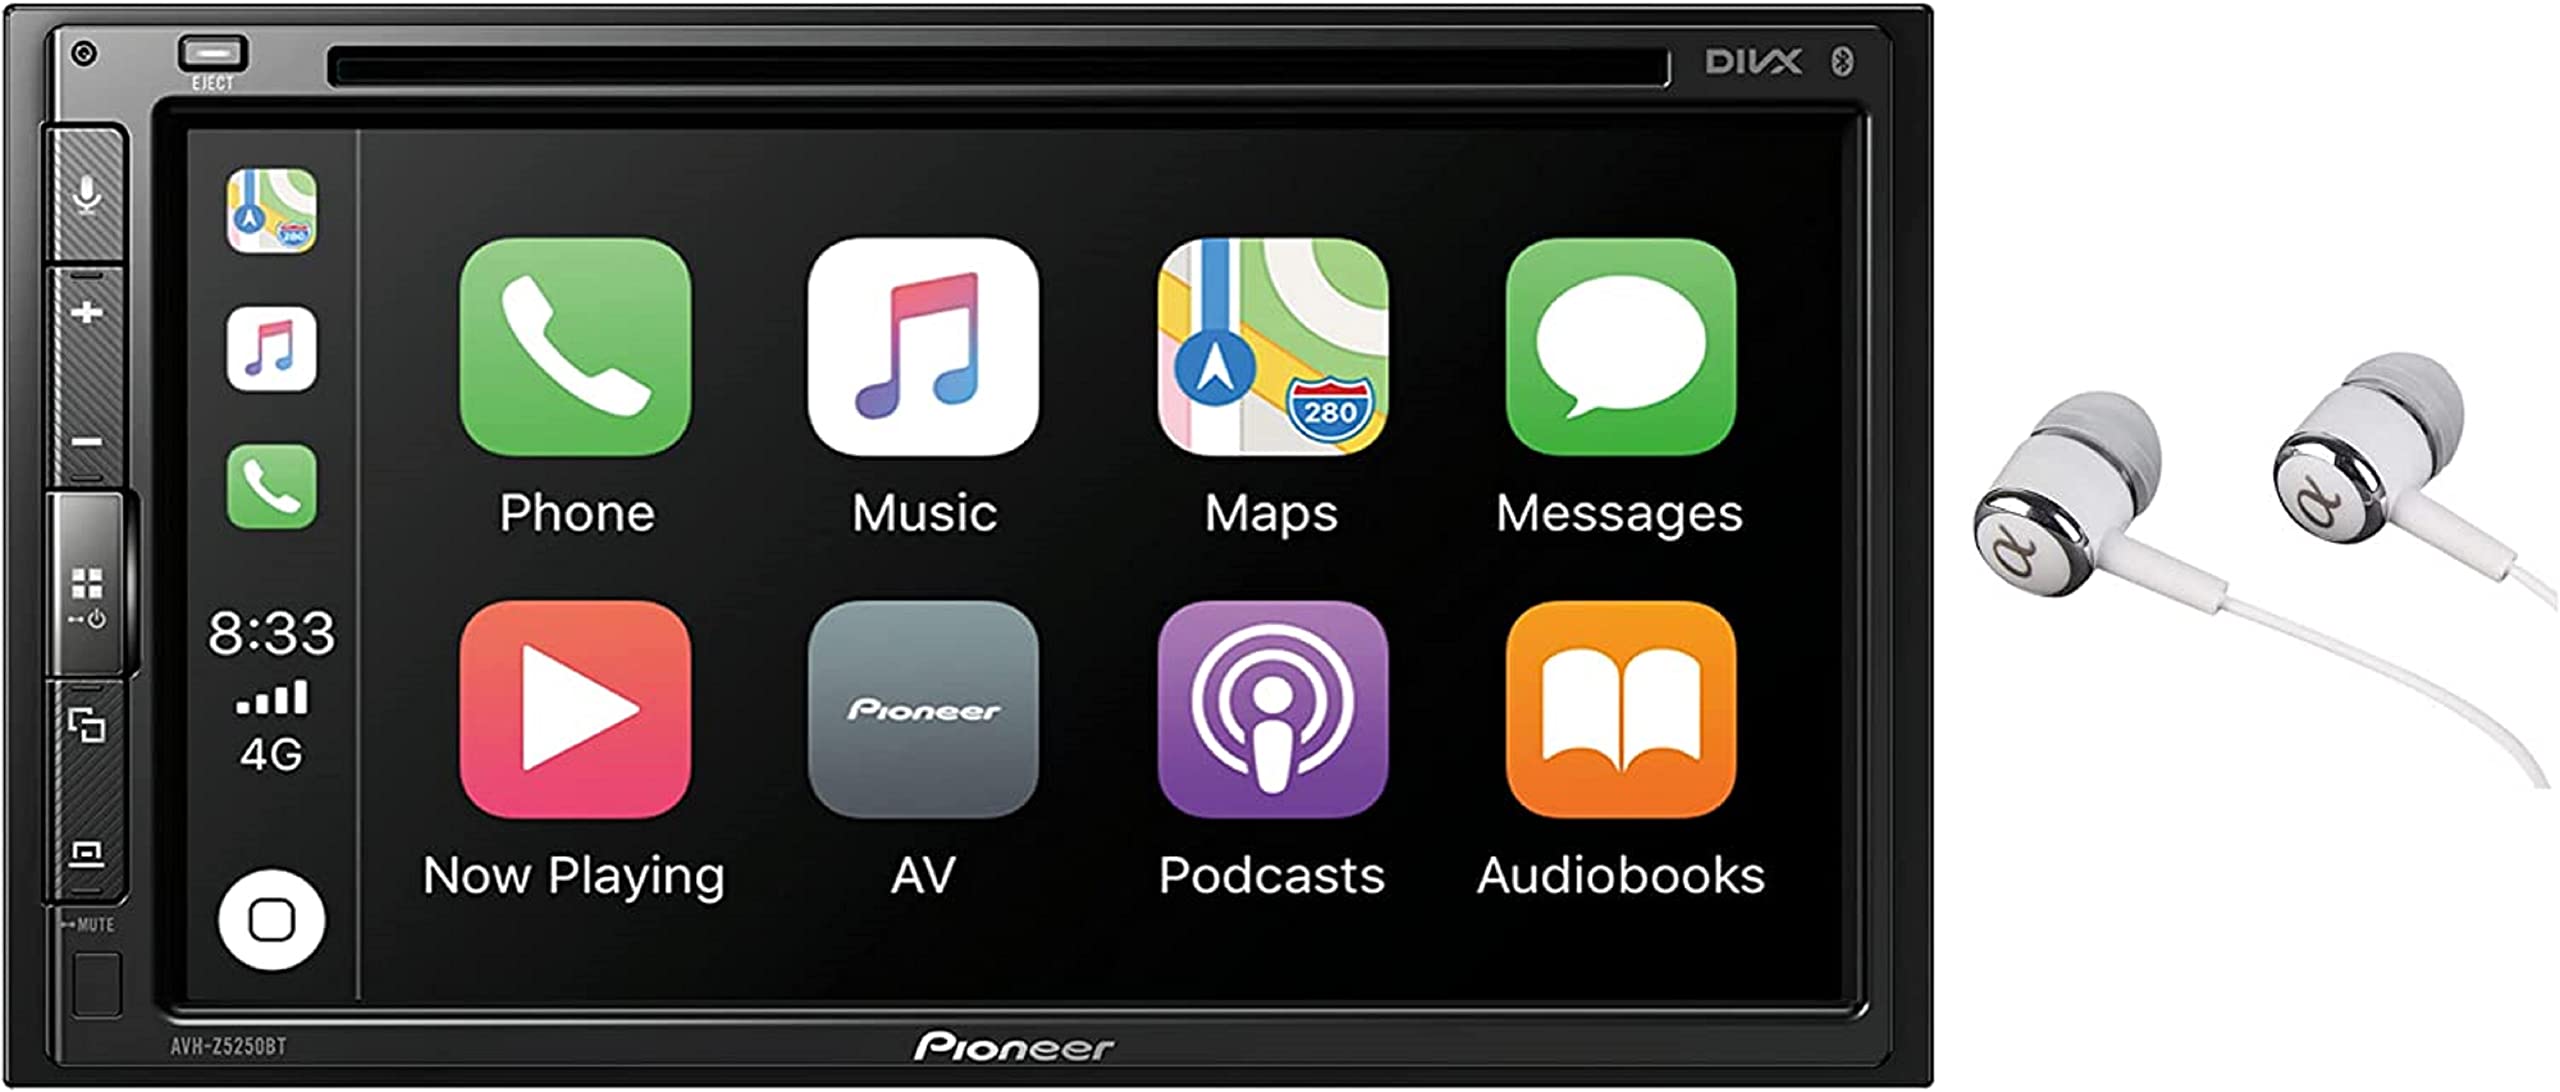 Pioneer Multimedia Double-Din In-Dash 6.2" WVGA Display Receiver Apple CarPlay. Built-in Bluetooth, AppRadio Mode/ Spotify & Pandora Bundled with Alphasonik Earbuds